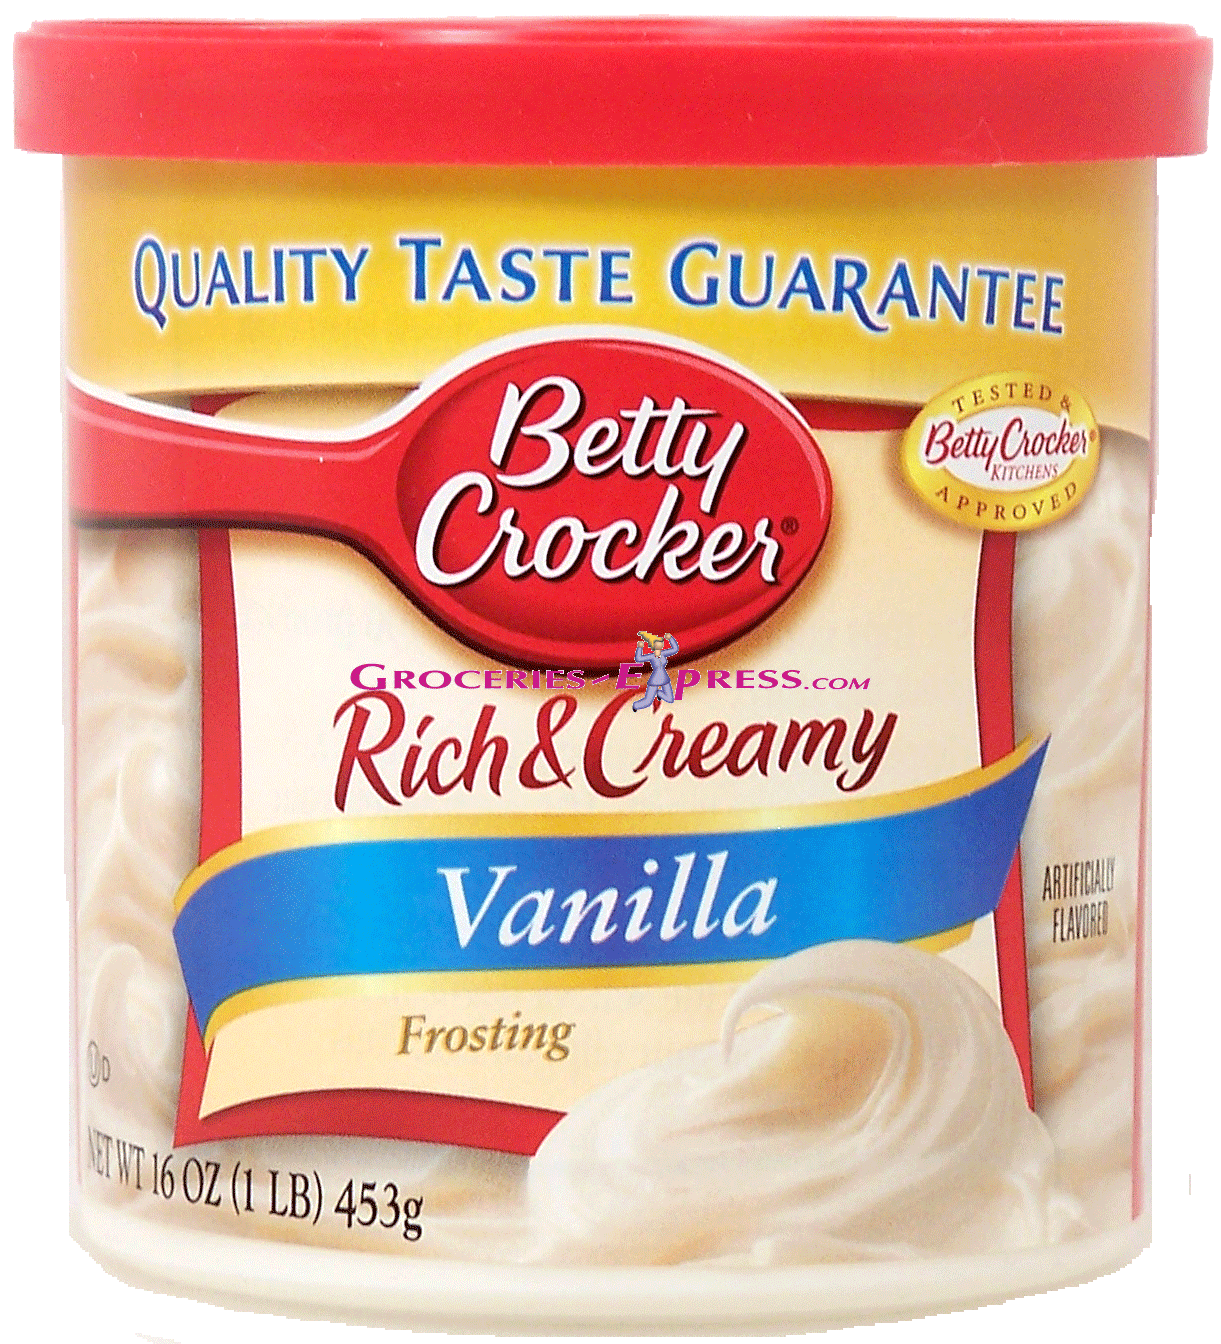 Betty Crocker Rich & Creamy vanilla frosting made with real butter Full-Size Picture